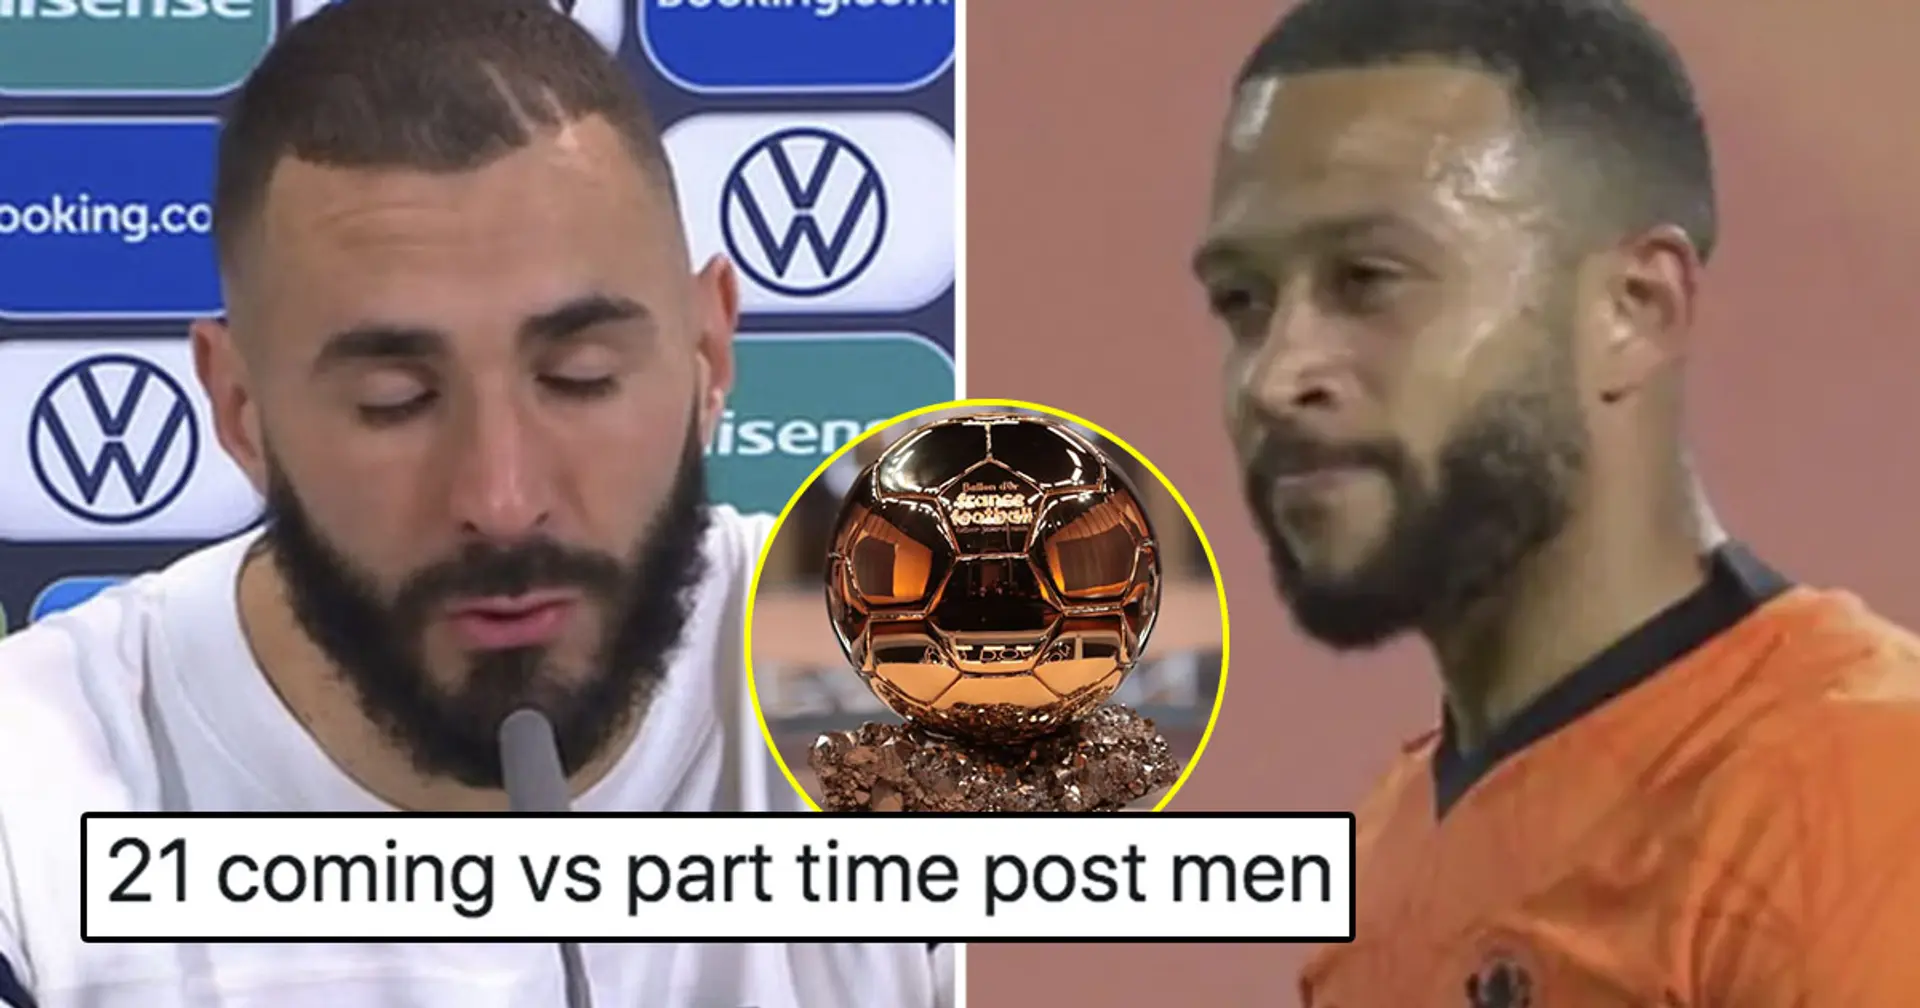 Depay beats Benzema in goals and assists, gets Ballon d'Or shouts by Barca fans – Madridista's reaction is pure gold